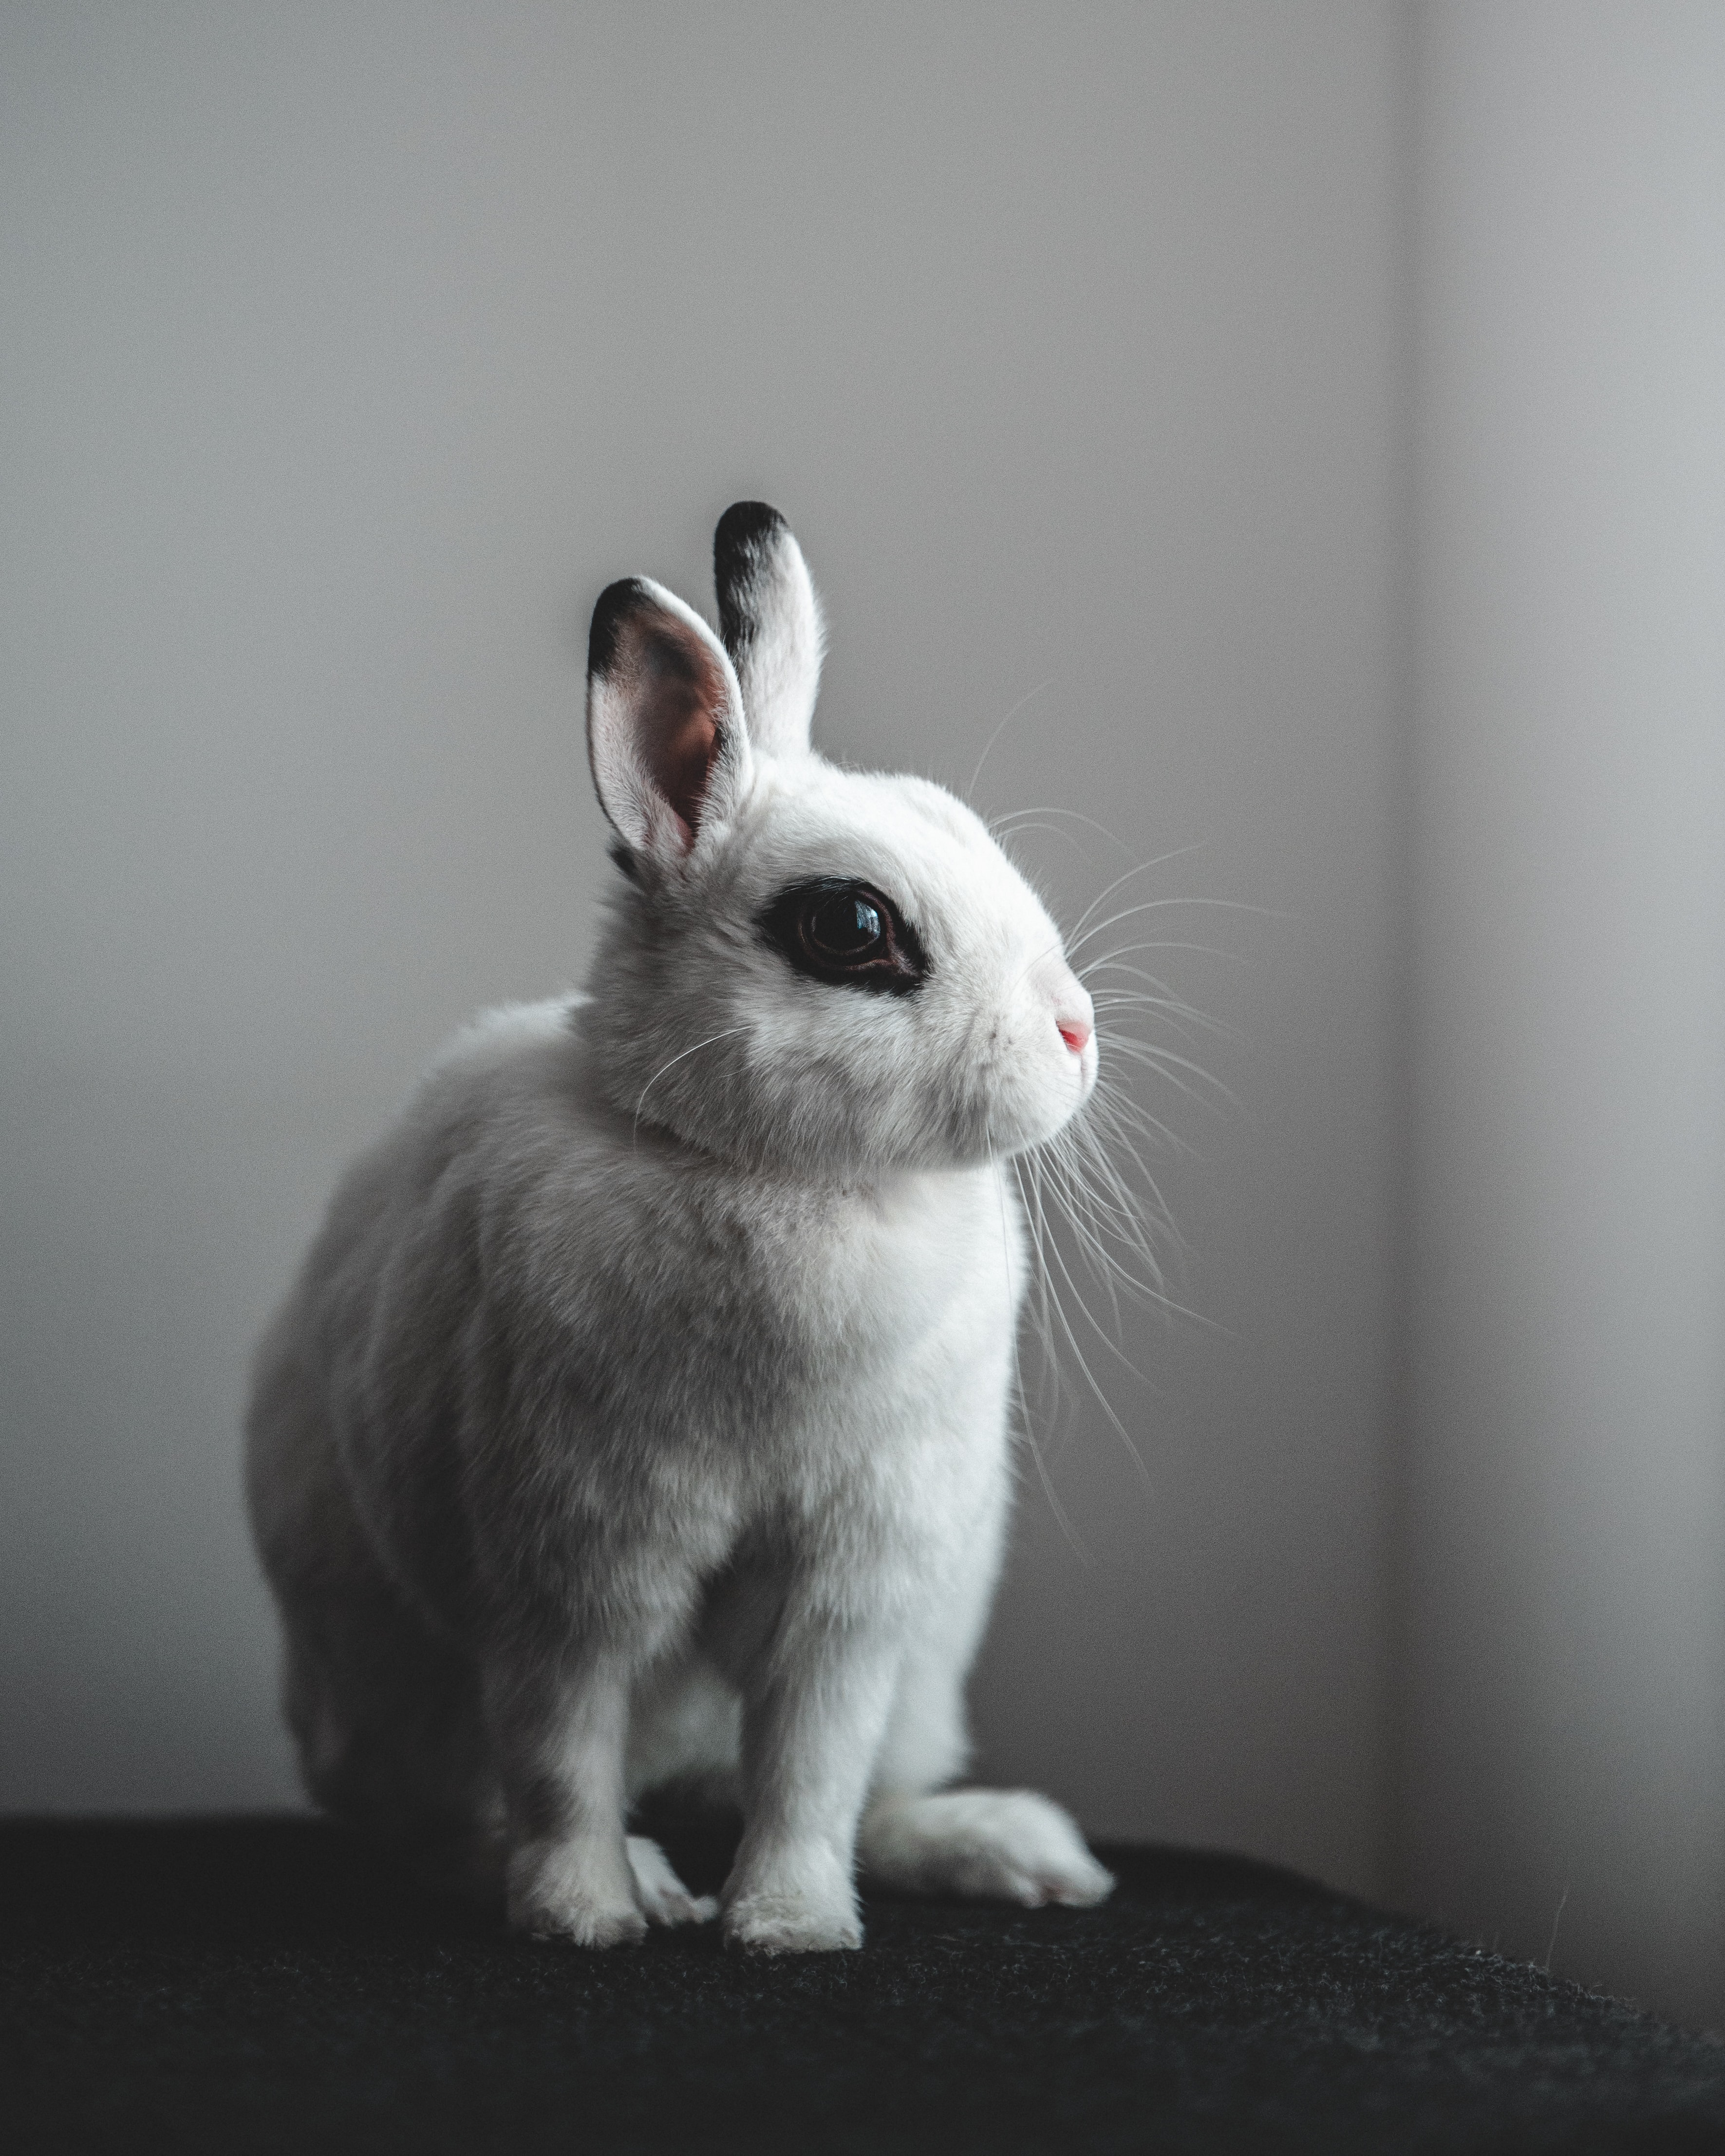 83407 Screensavers and Wallpapers Rabbit for phone. Download animals, white, rabbit, hare pictures for free